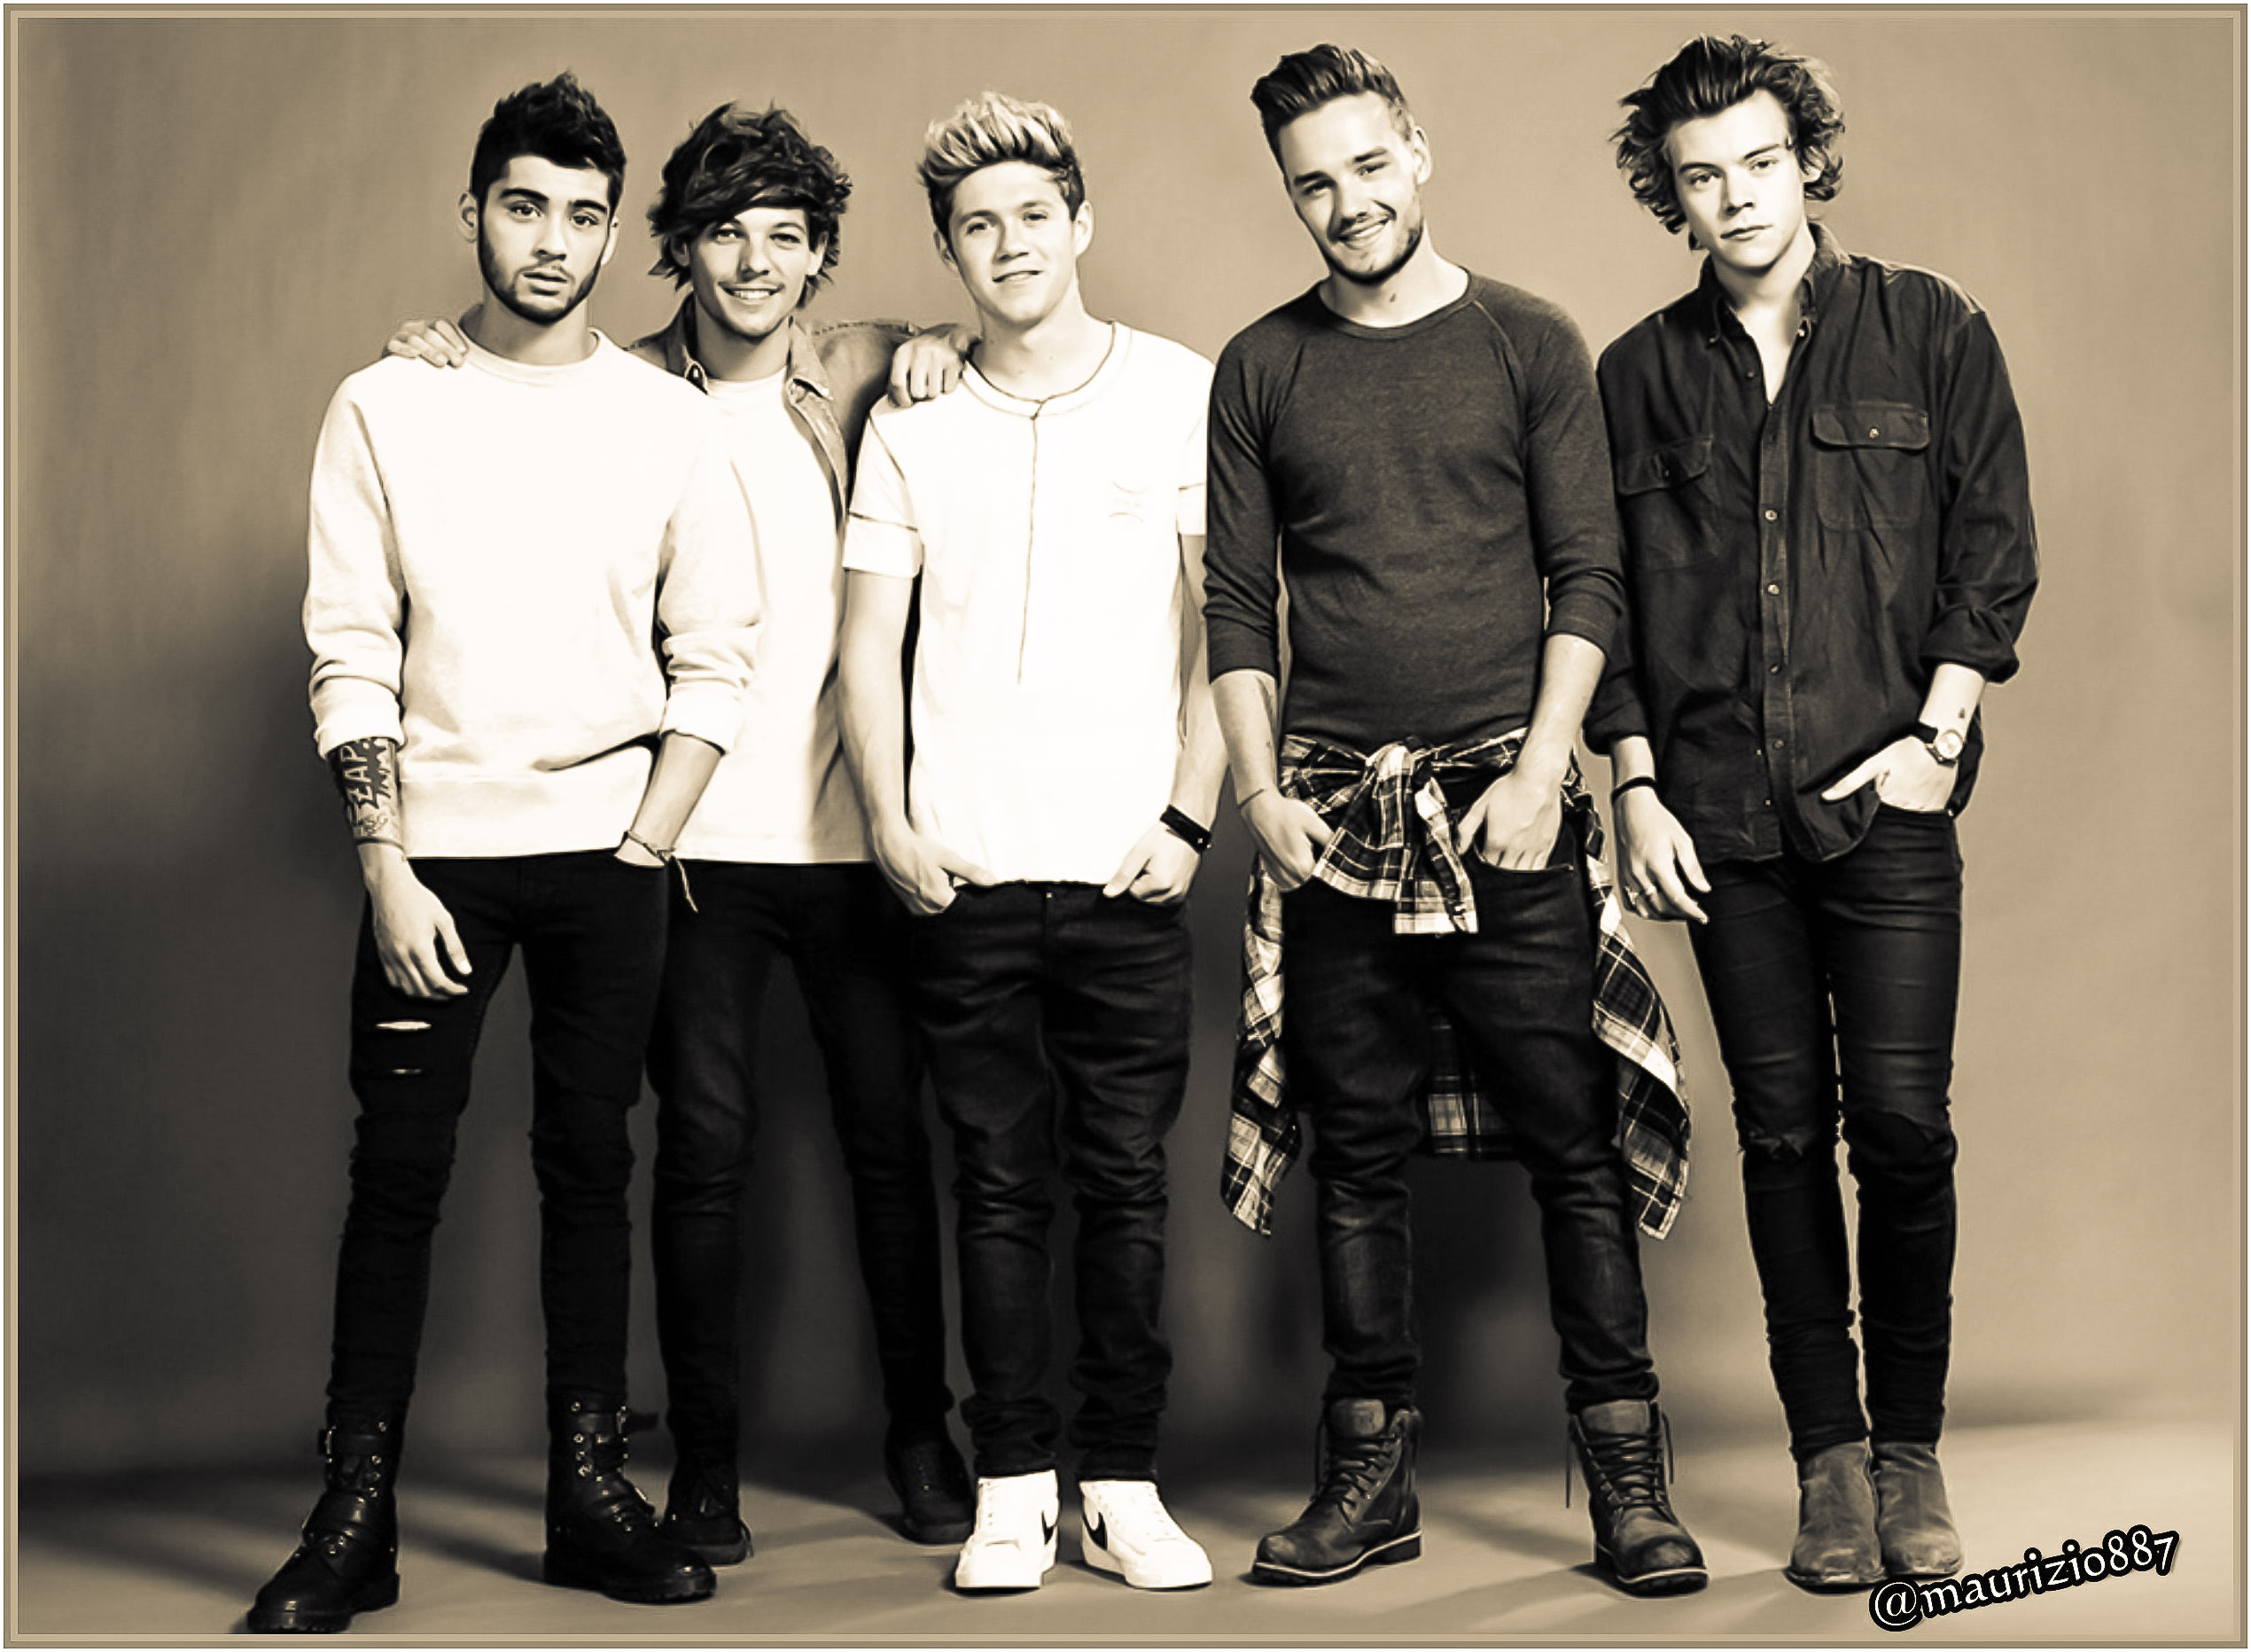 http://images6.fanpop.com/image/photos/37000000/one-direction-photoshoot-2014-one-direction-37000227-2540-1864.jpg